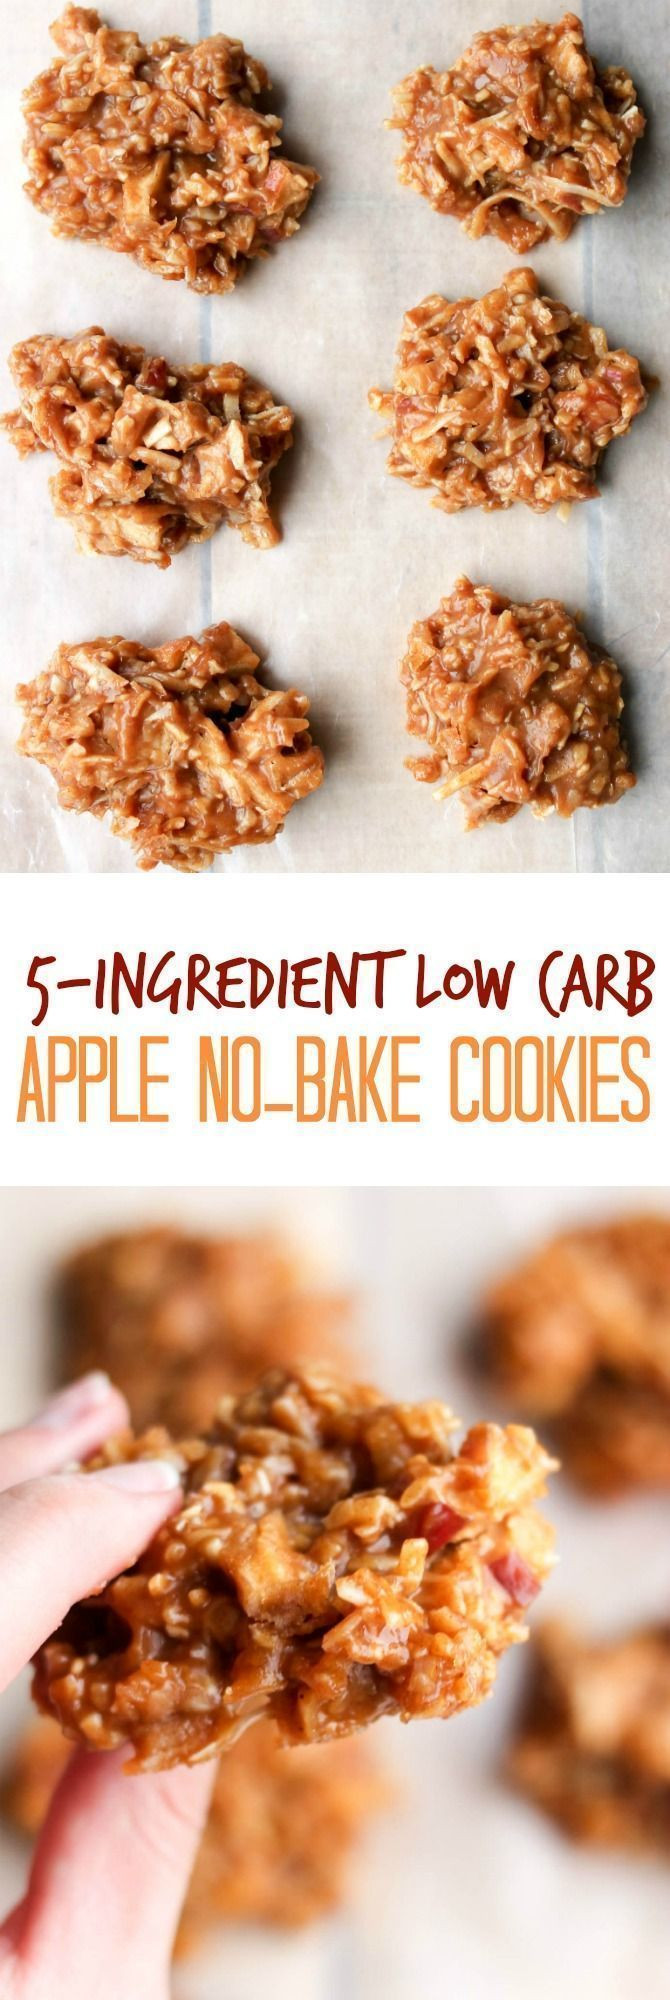 Gourmet Low Carb Recipes
 5 Minute Low Carb Apple No Bake Cookies Recipe